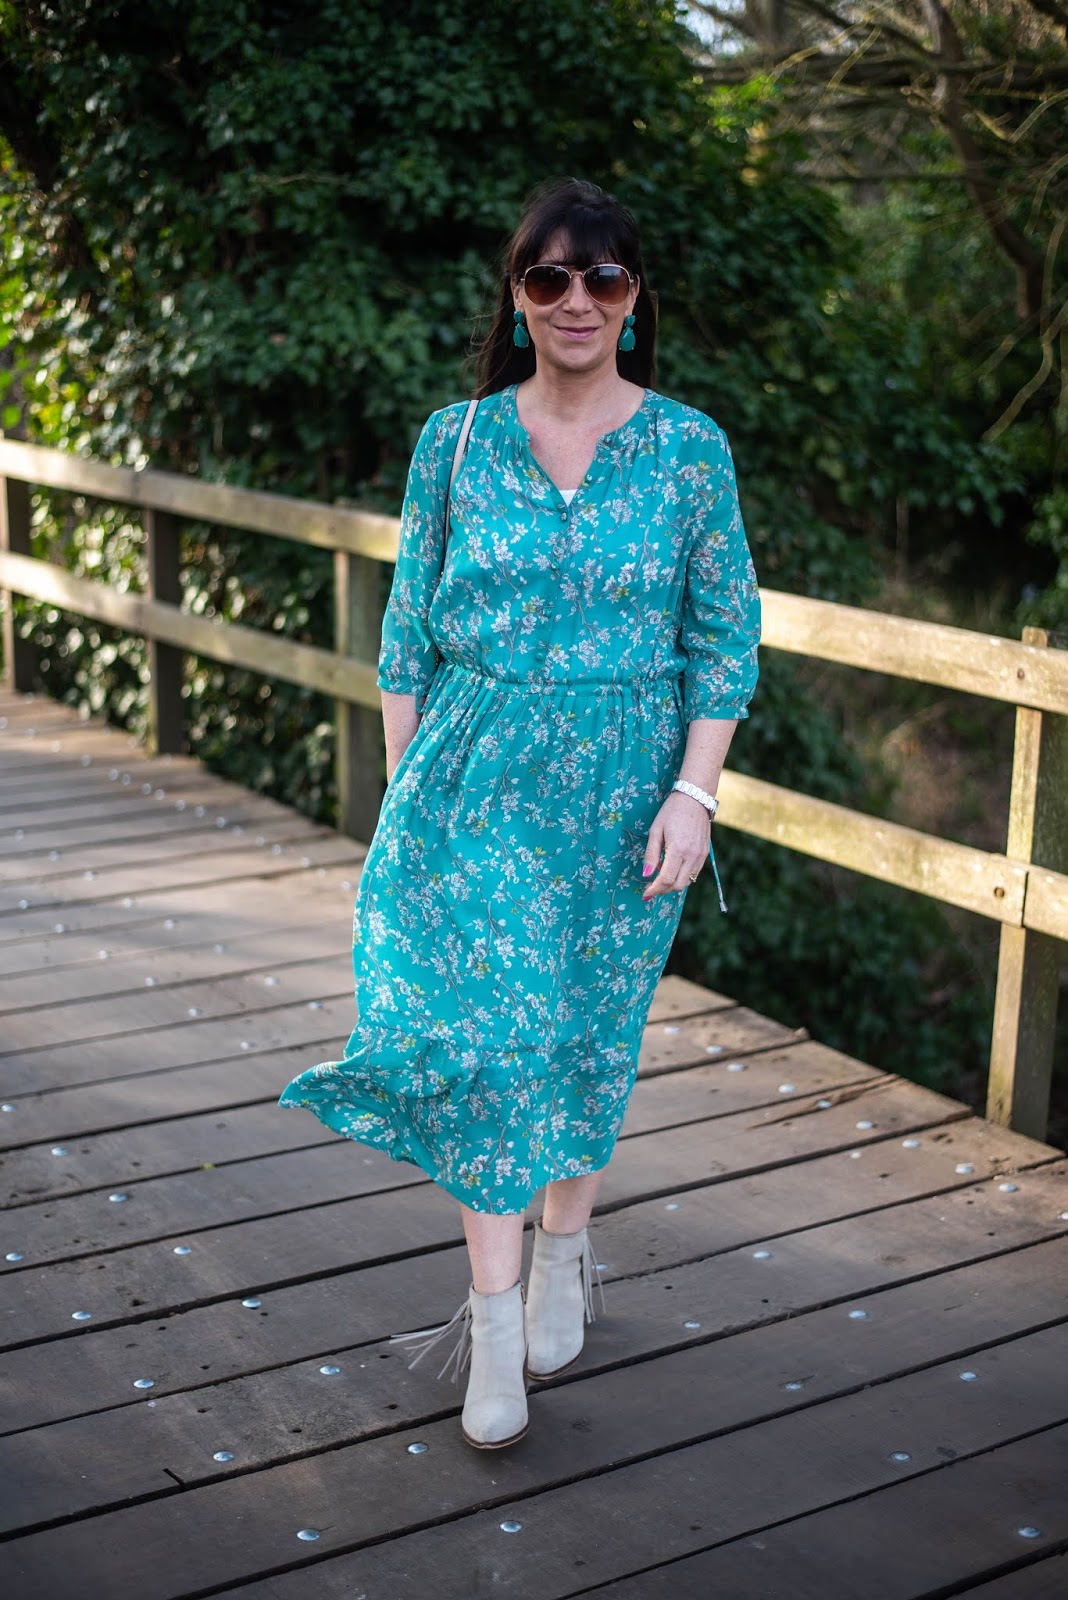 Style not Age - Spring Green's from Next! | Mummabstylish